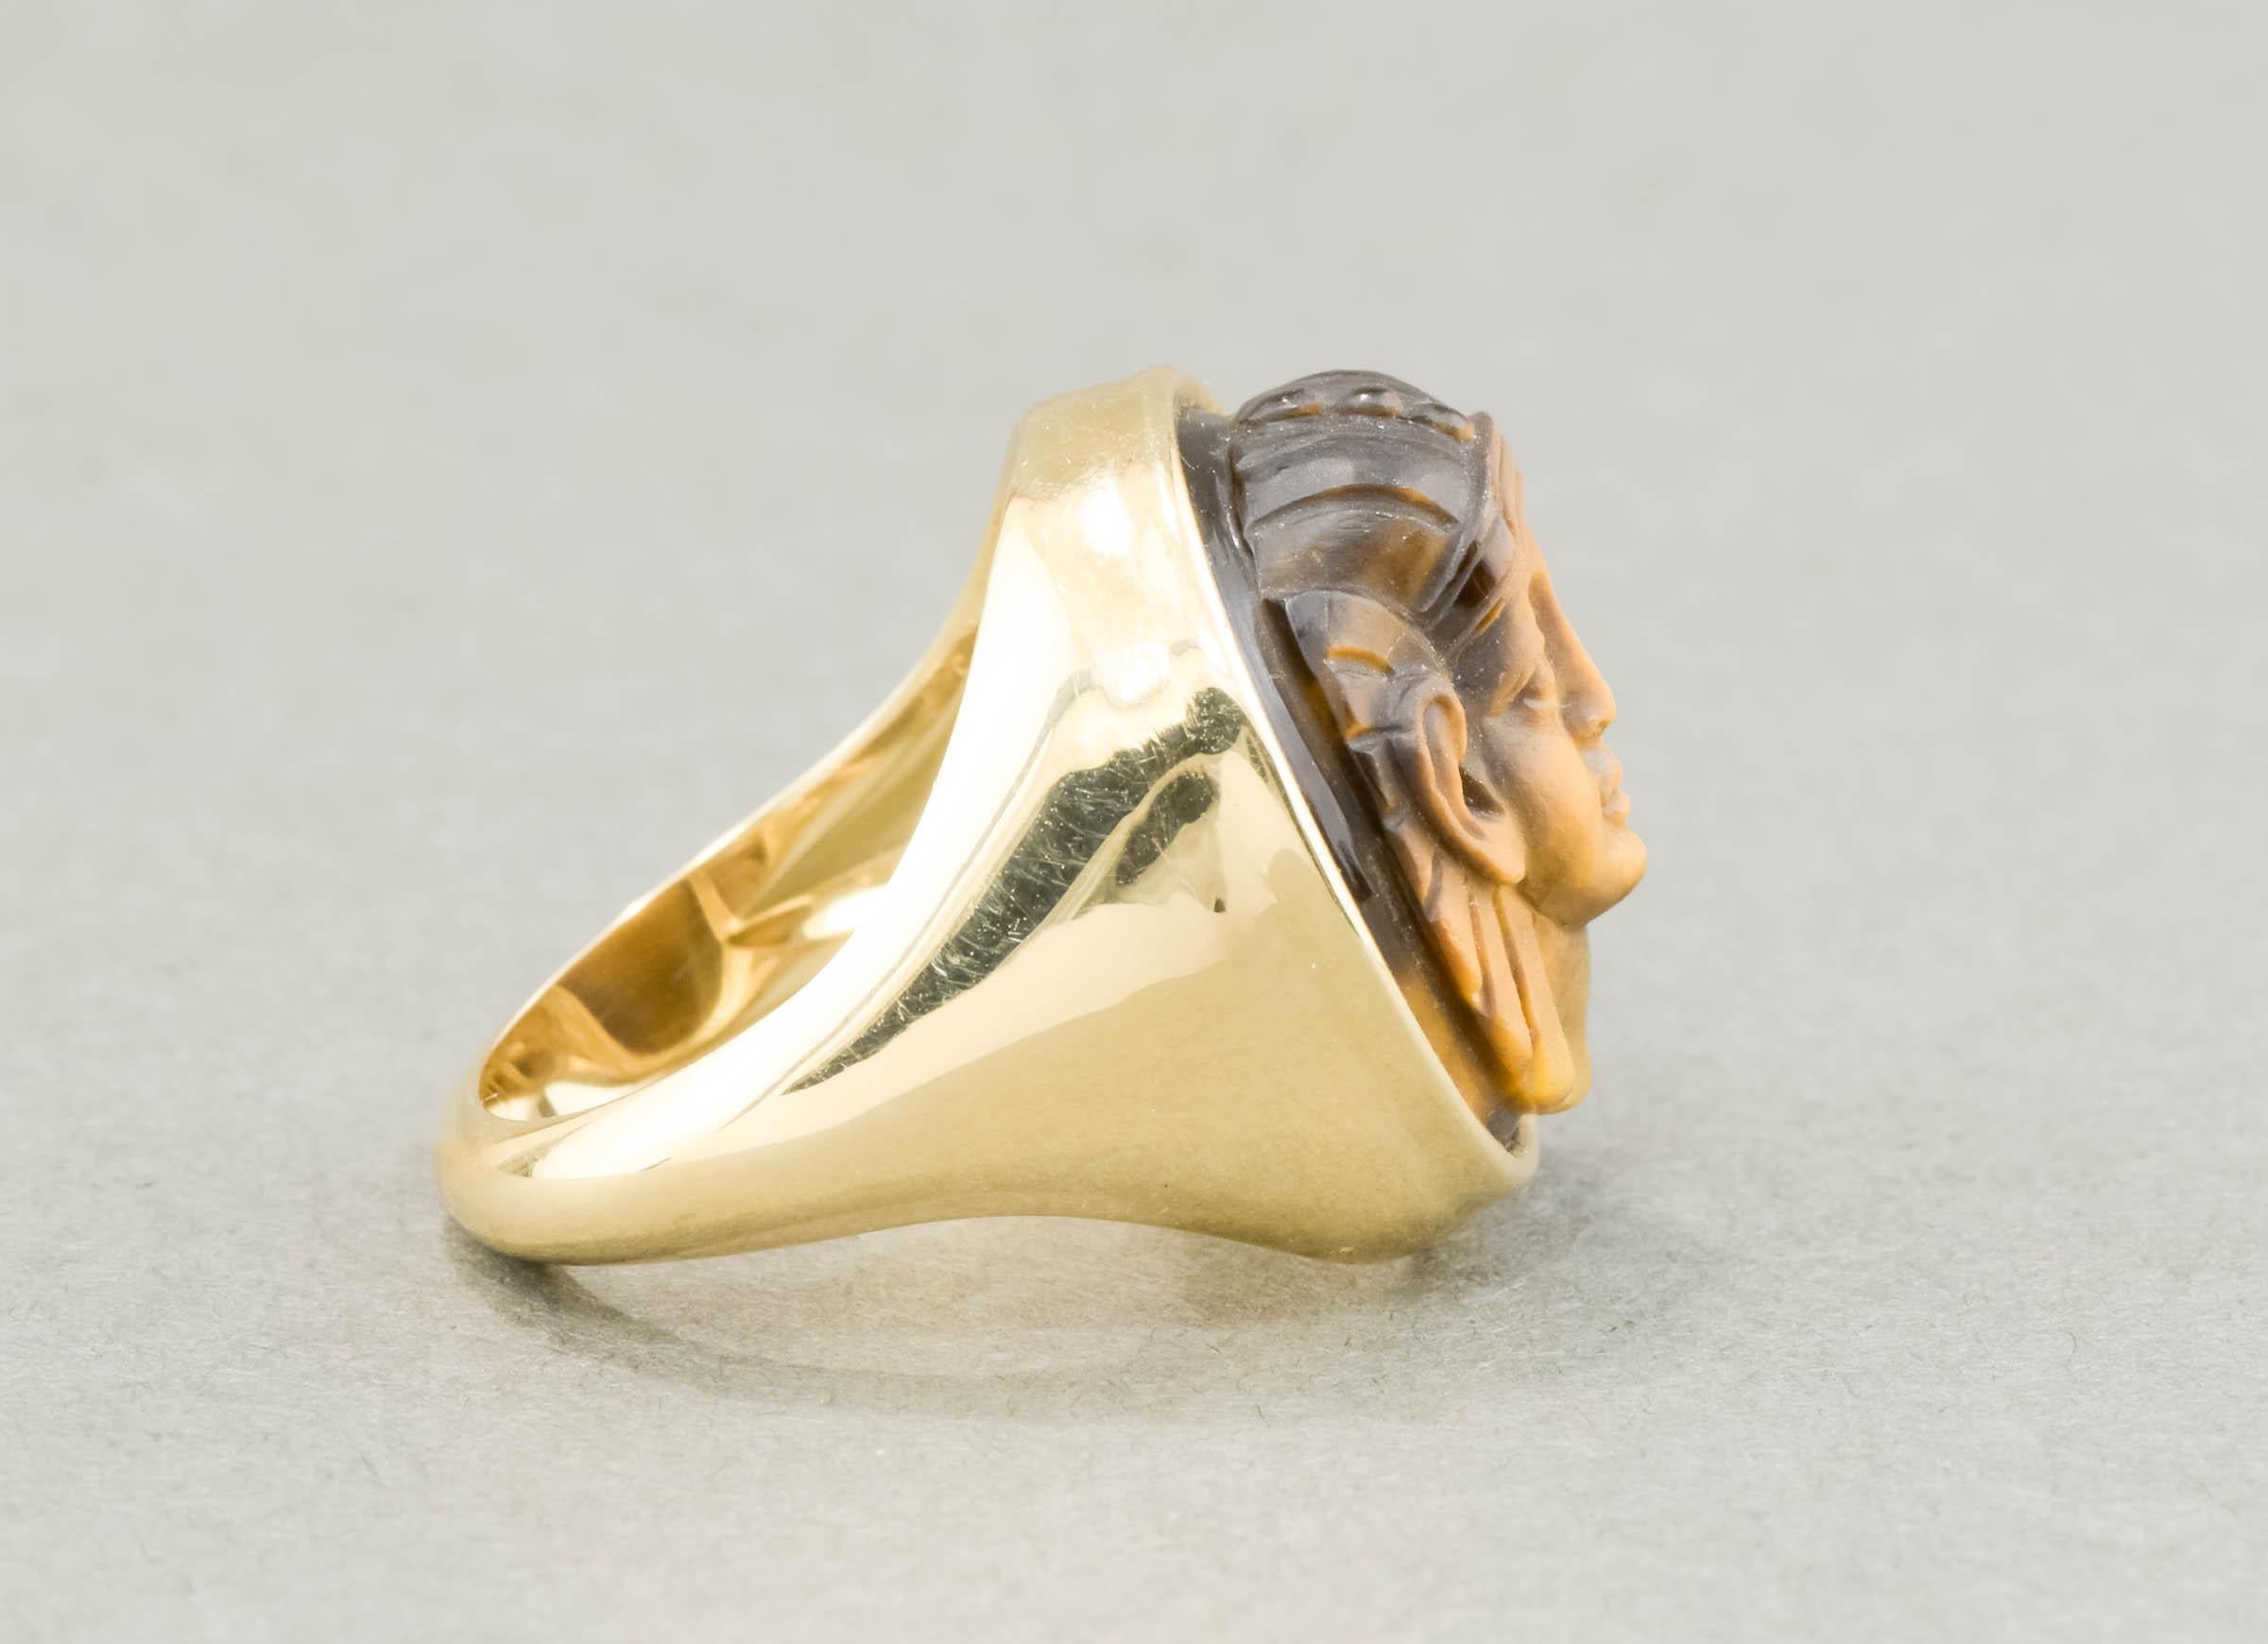 Cabochon Egyptian Revival Carved Tigers Eye Pharaoh Gold Signet Ring - Antique Conversion